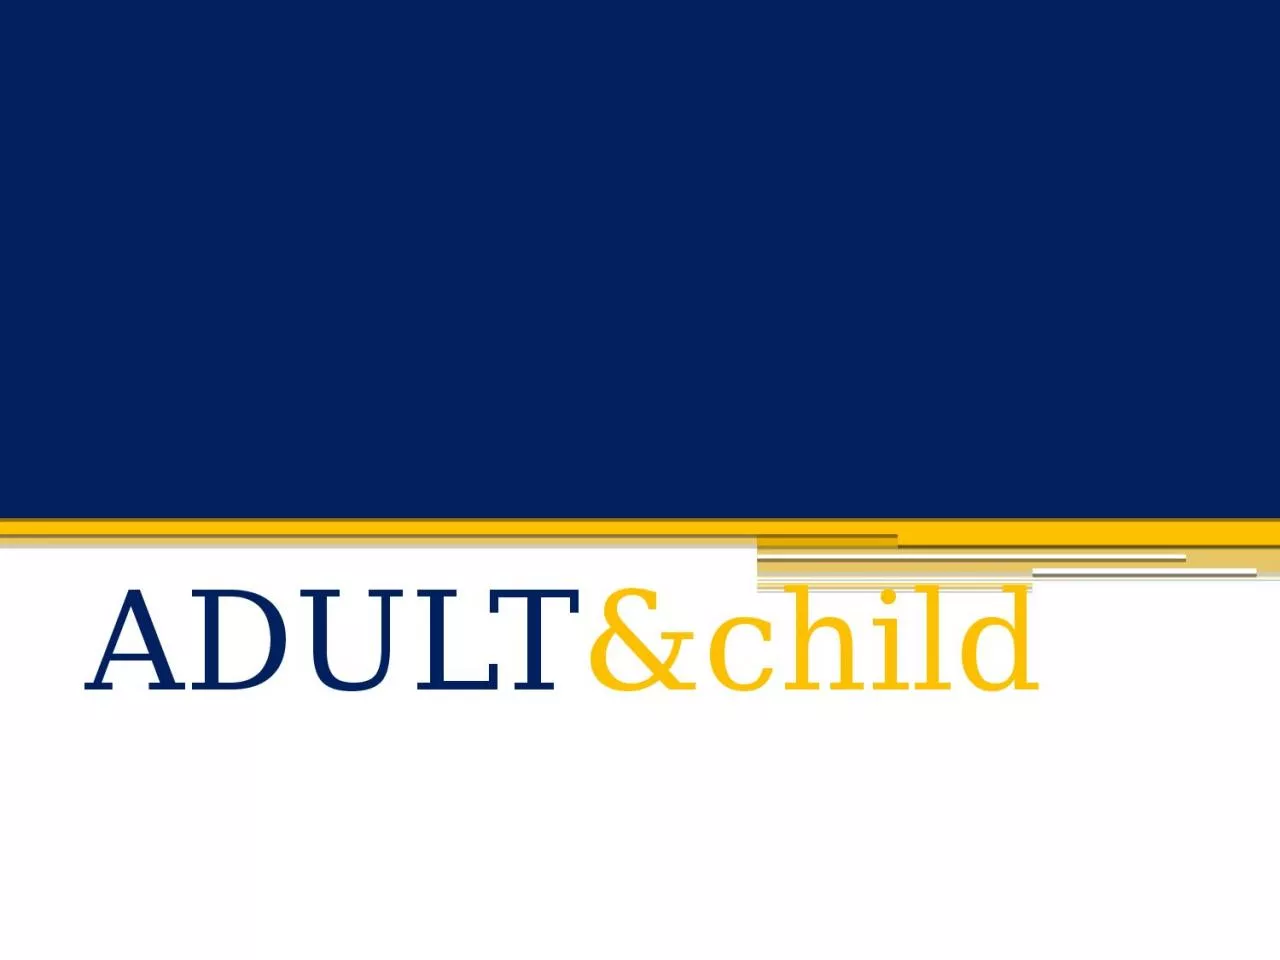 ADULT &child National Research and Trends